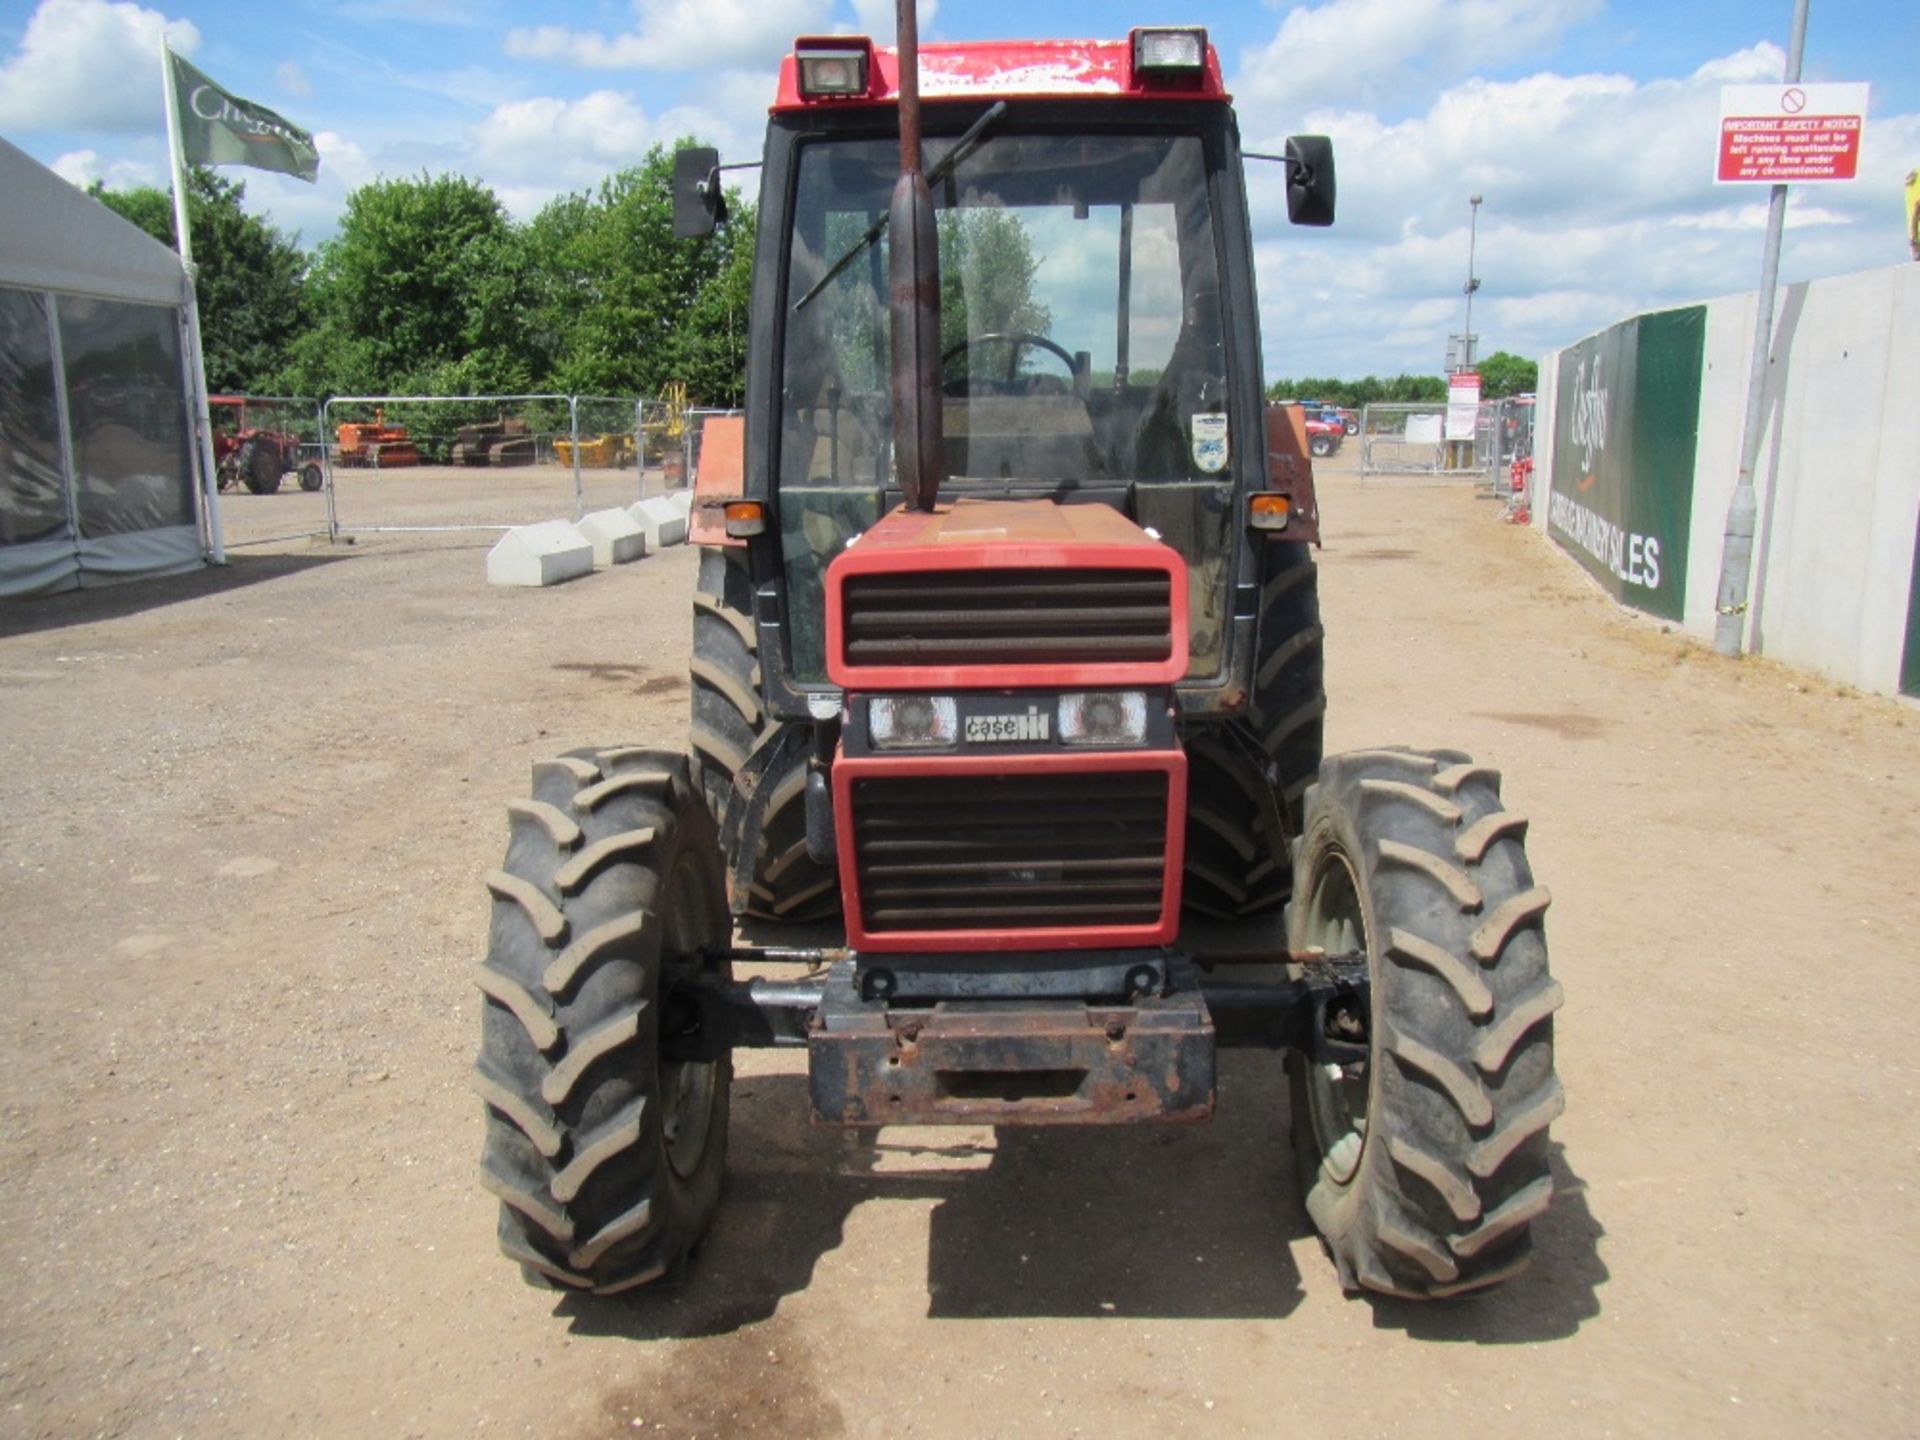 Case 844XL 4wd Tractor c/w V5 Reg. No. H734 BEG Hours: 7,275 - Image 2 of 17